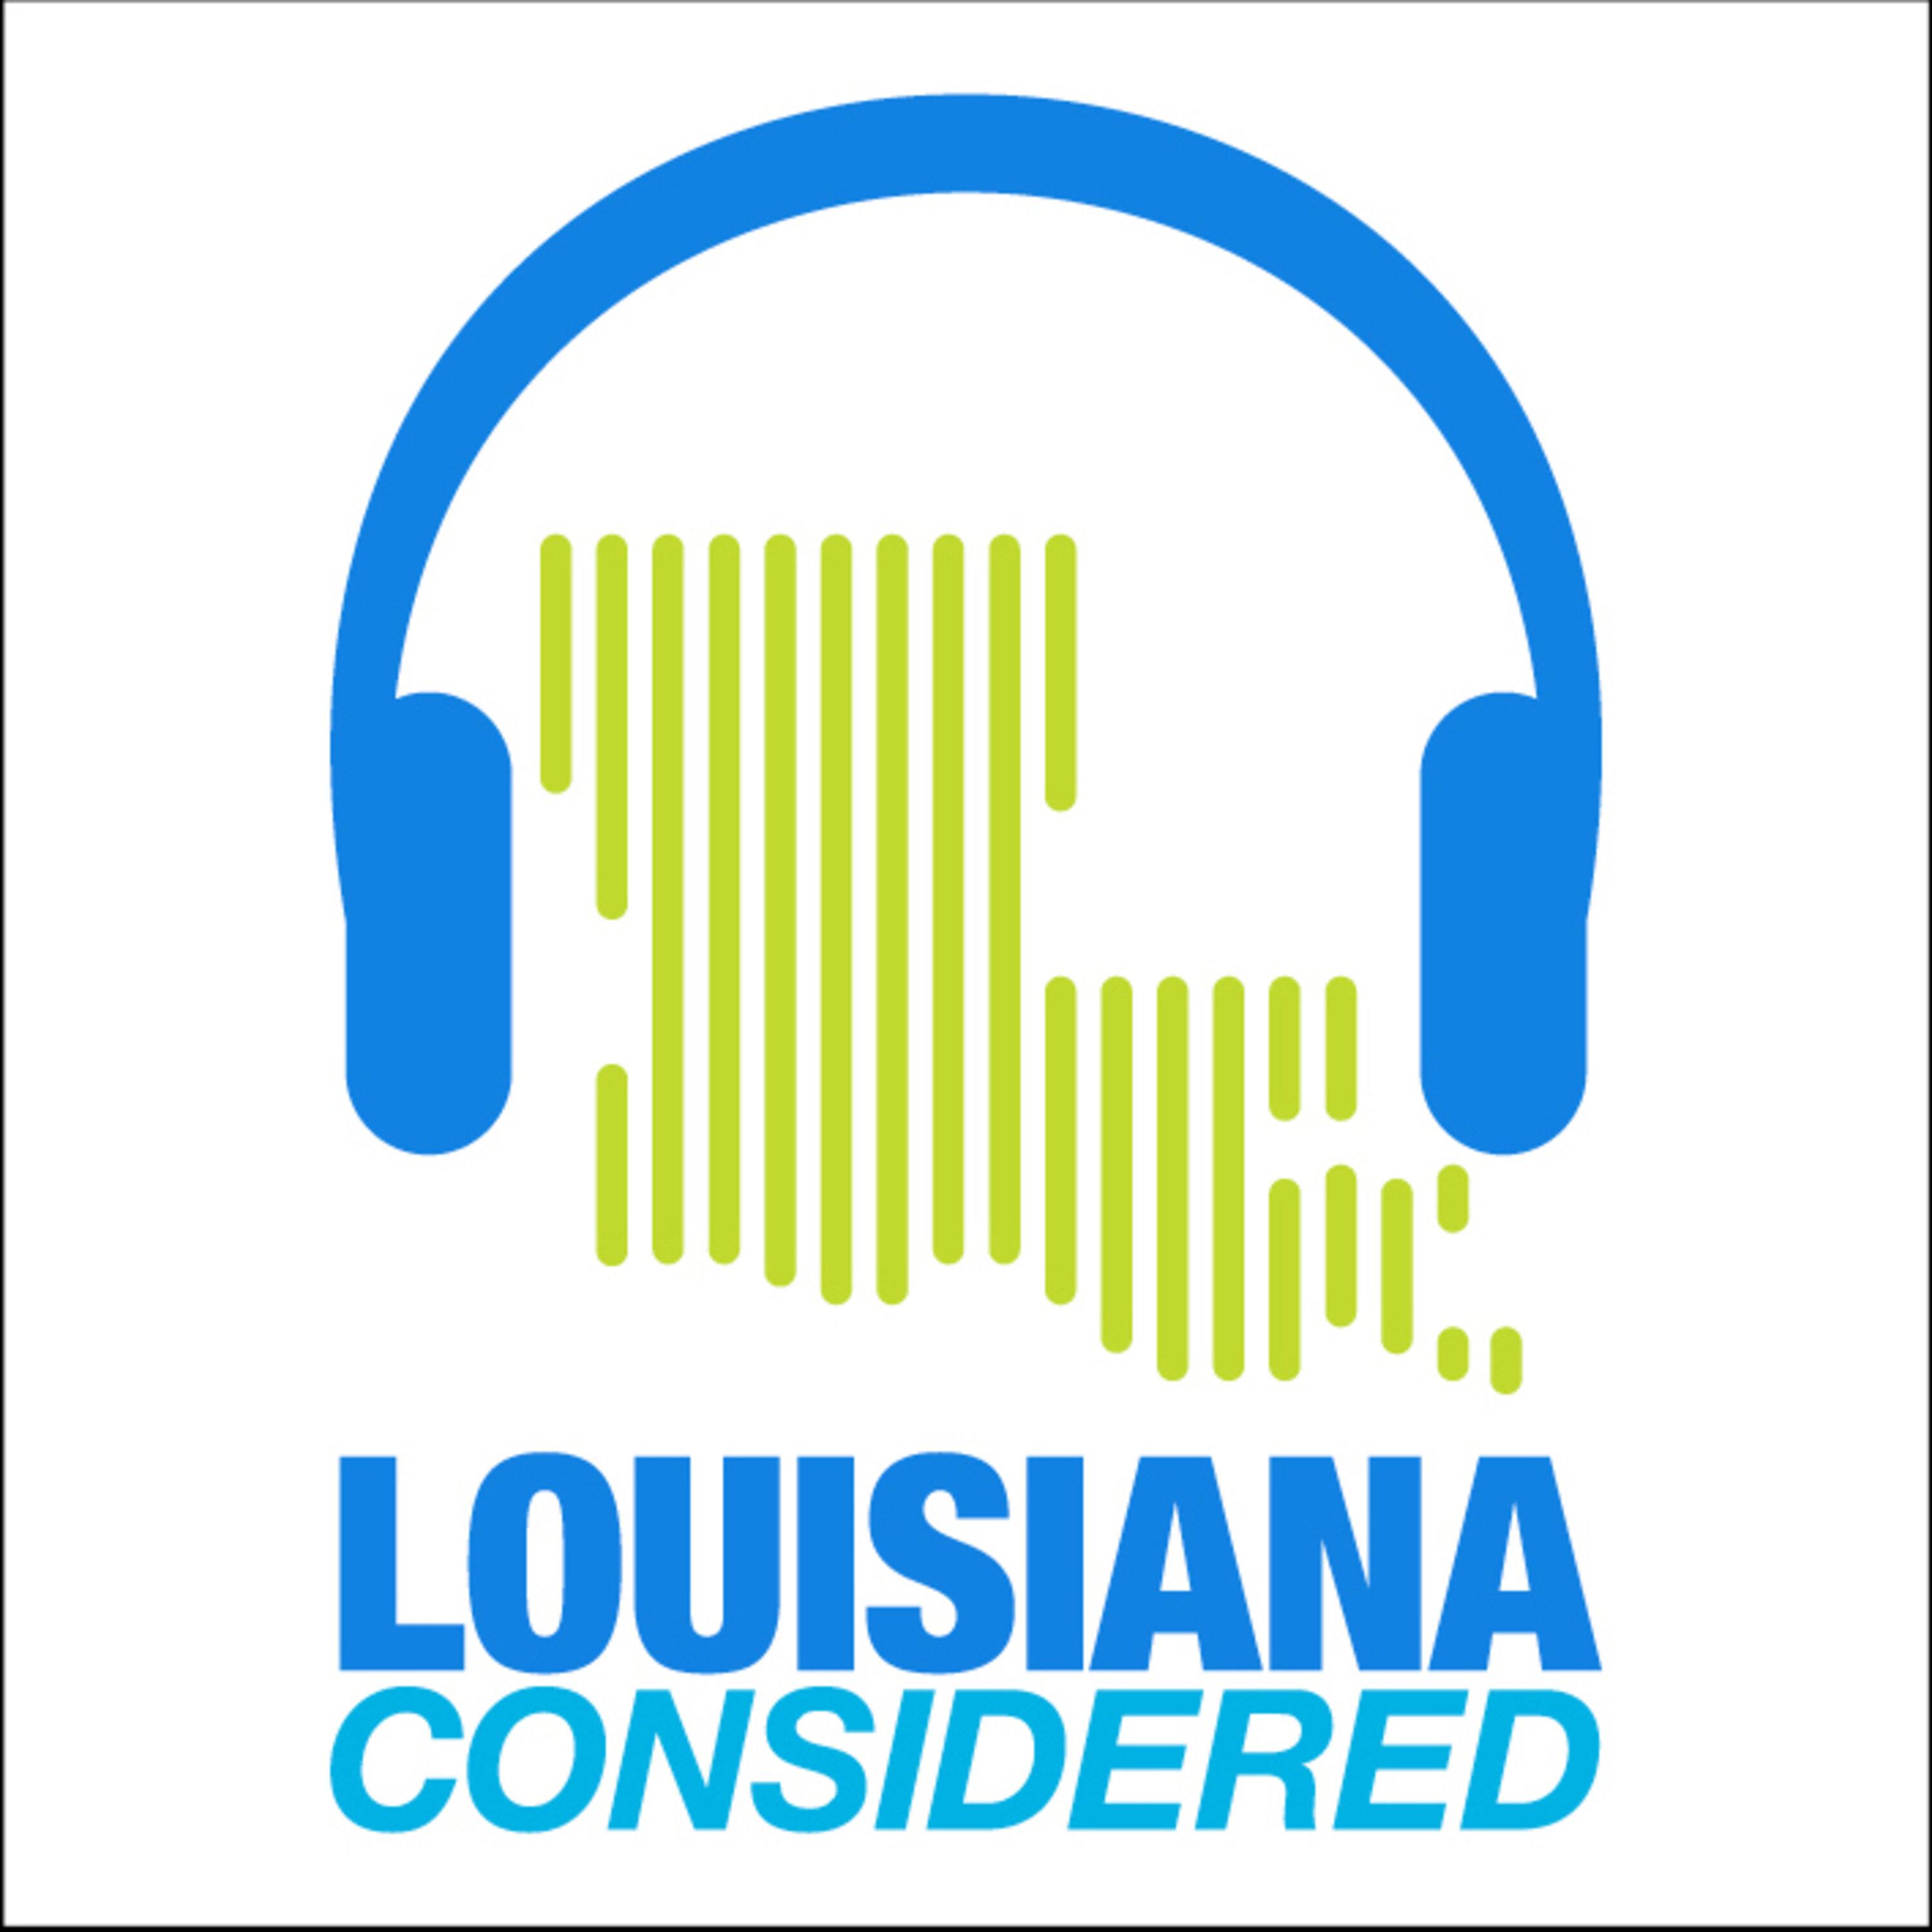 Thumbnail for "How Louisiana’s club and music businesses are preparing for festival season".